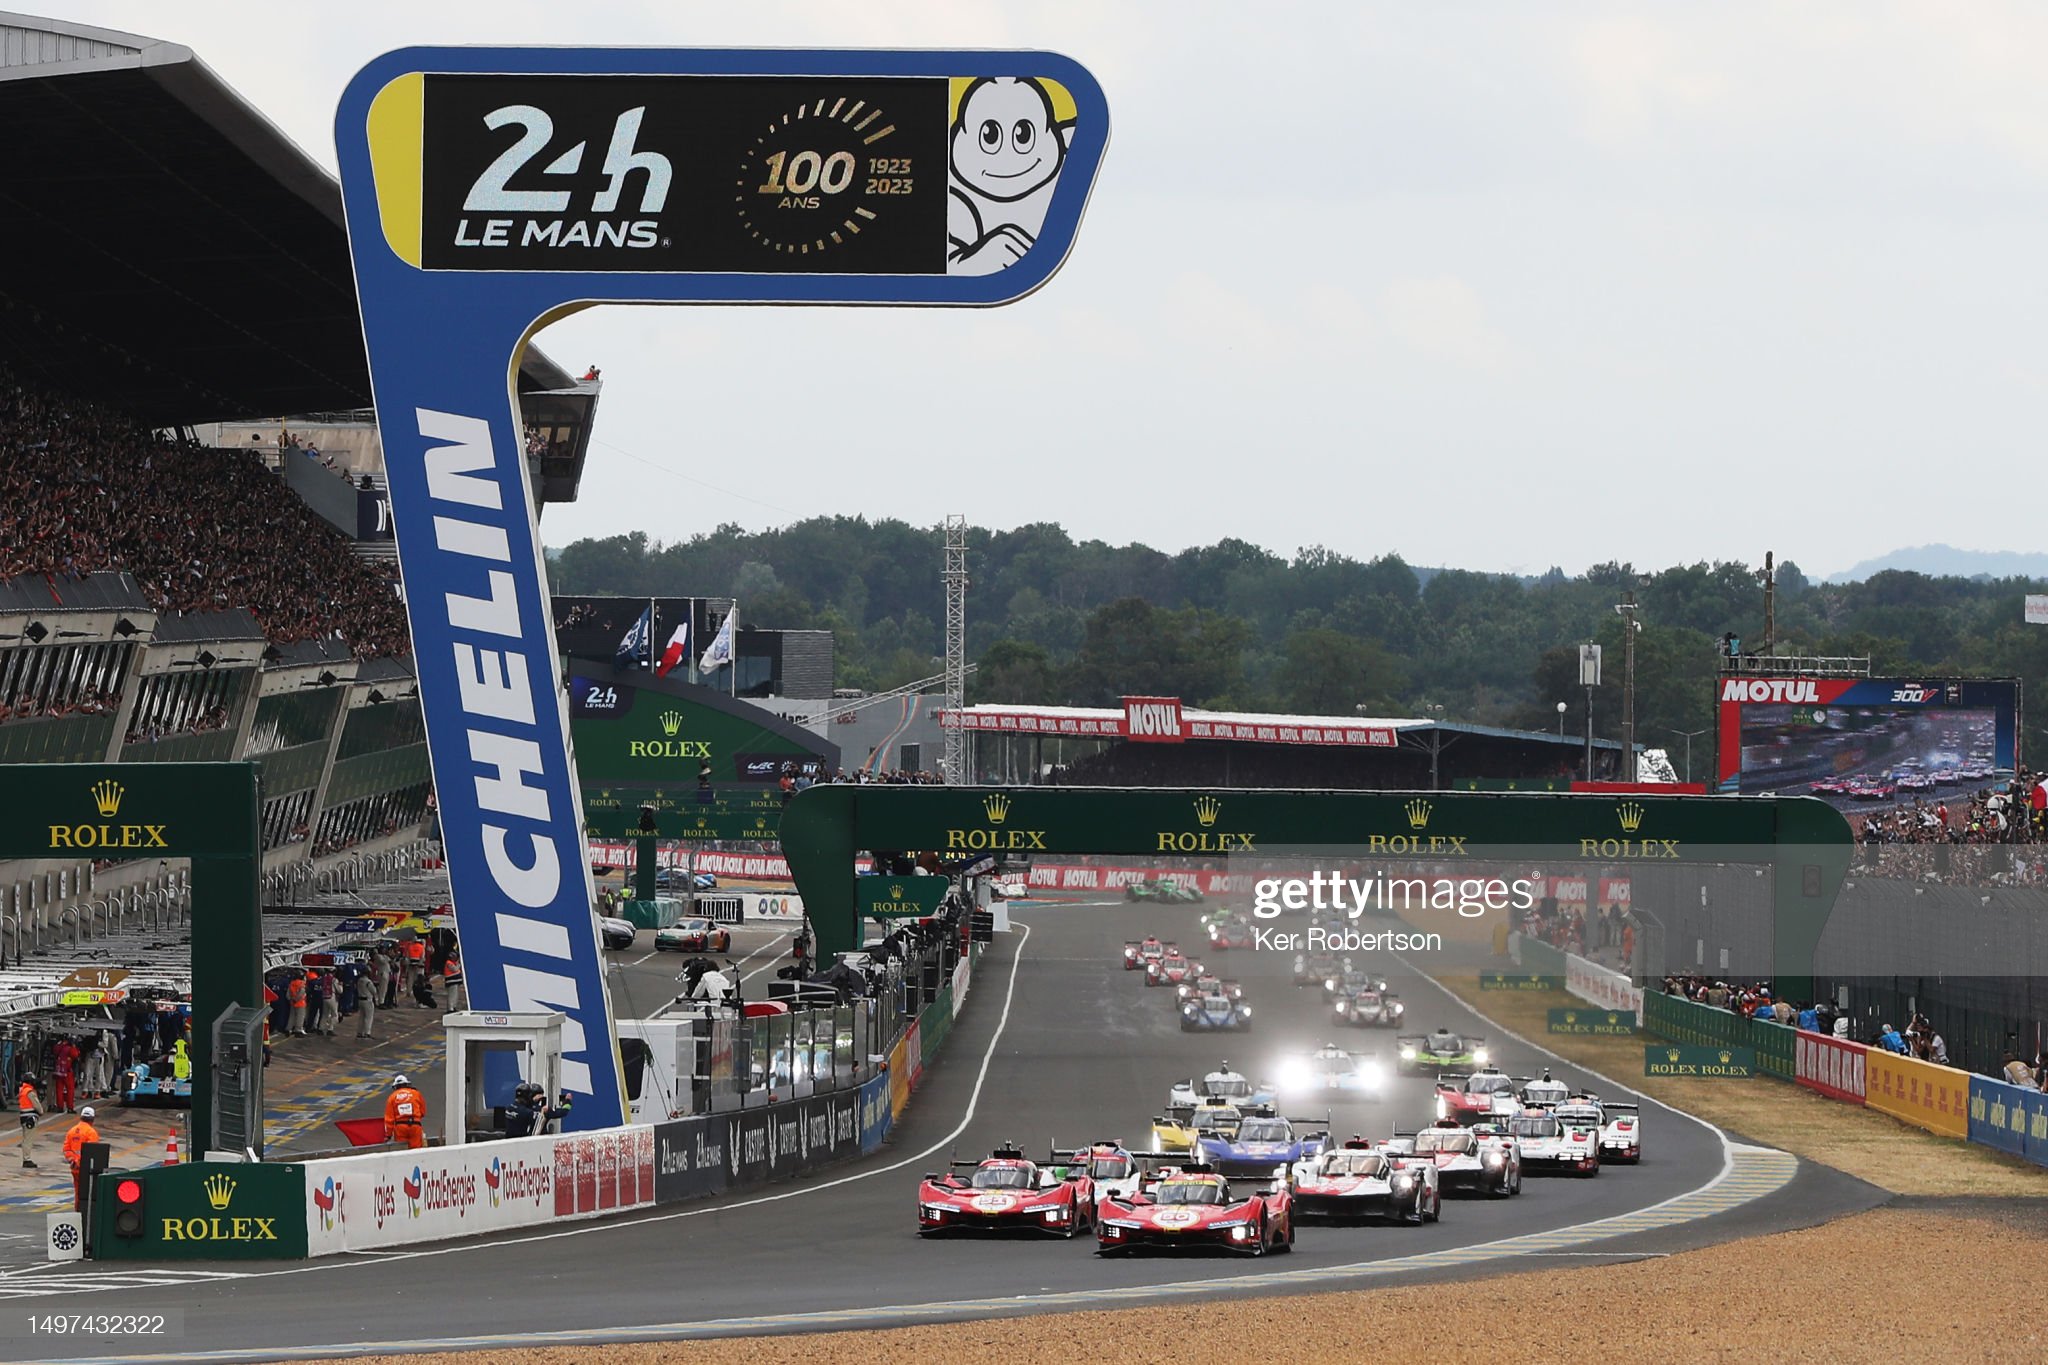 The Ferrari 499P of Nicklas Nielsen (front right) and the Ferrari 499P of James Calado (front left) lead the field at the start of the 100th anniversary 24 Hours of Le Mans race at the Circuit de la Sarthe on June 10, 2023 in Le Mans, France.